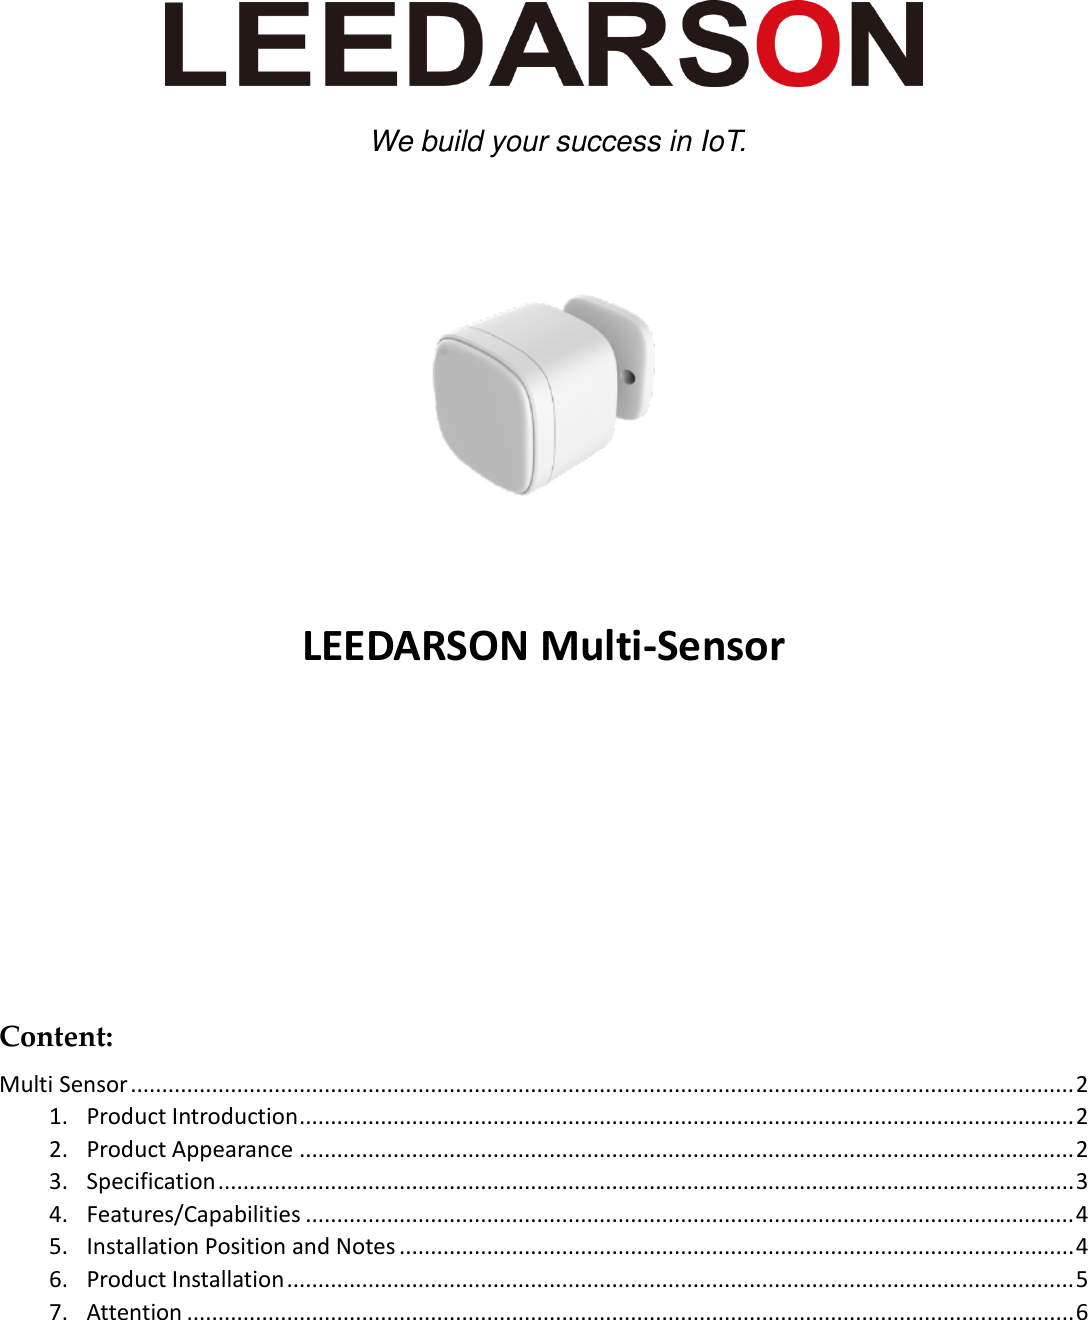         LEEDARSON Multi-Sensor      Content: Multi Sensor ....................................................................................................................................................... 2 1. Product Introduction ............................................................................................................................ 2 2. Product Appearance ............................................................................................................................ 2 3. Specification ......................................................................................................................................... 3 4. Features/Capabilities ........................................................................................................................... 4 5. Installation Position and Notes ............................................................................................................ 4 6. Product Installation .............................................................................................................................. 5 7. Attention .............................................................................................................................................. 6   We build your success in IoT. 